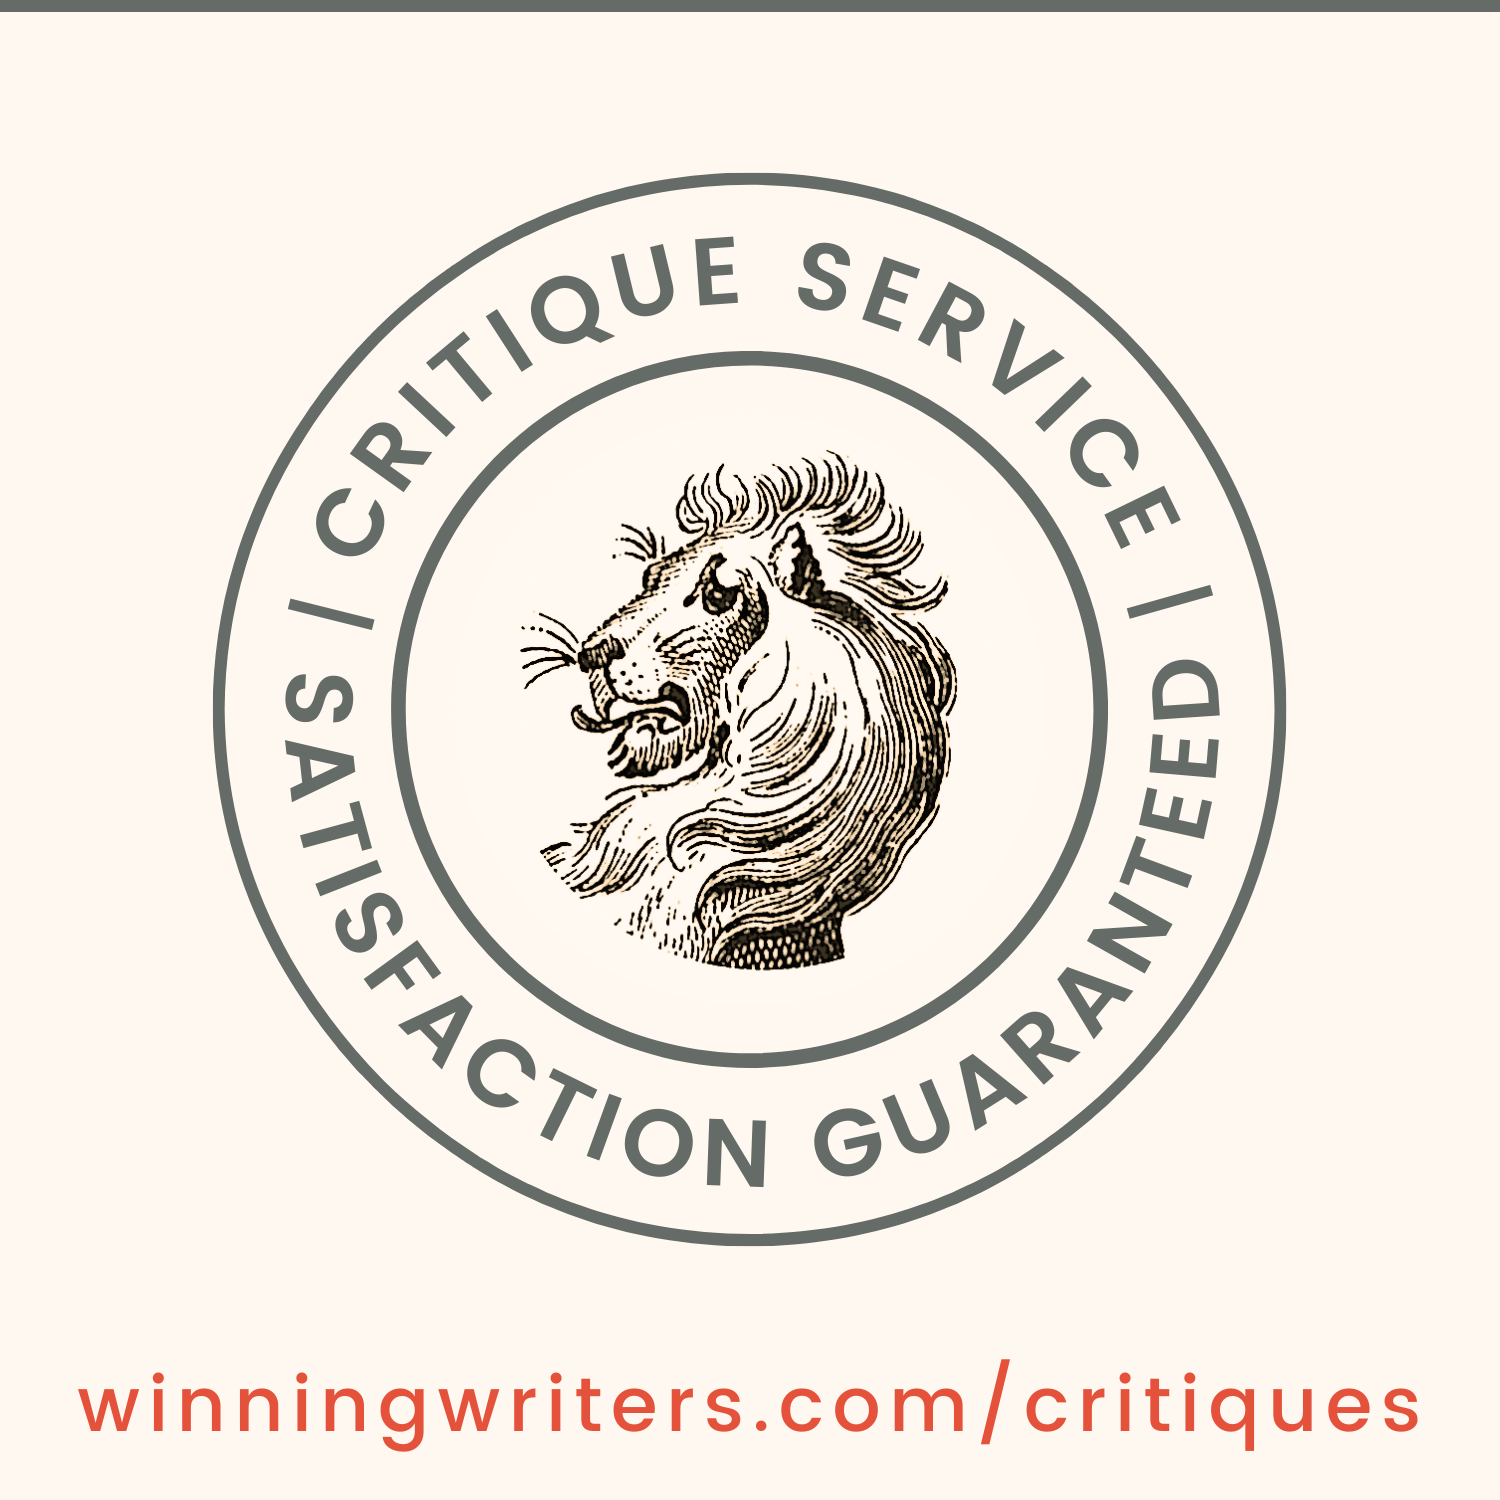 Critiques from Winning Writers